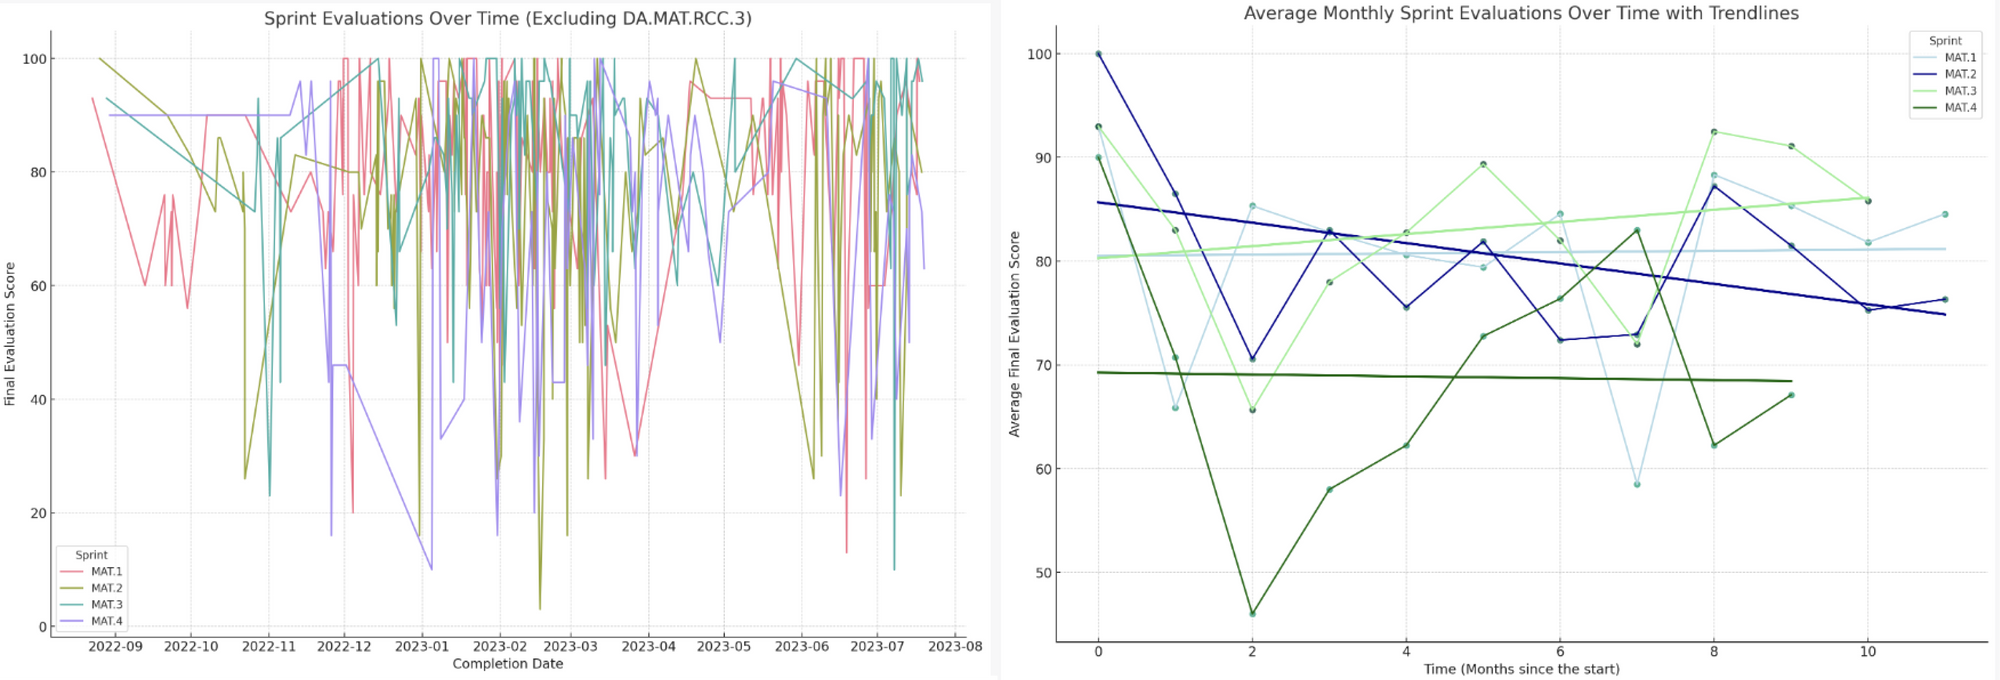 Improvement in ChatGPT-generated graphs